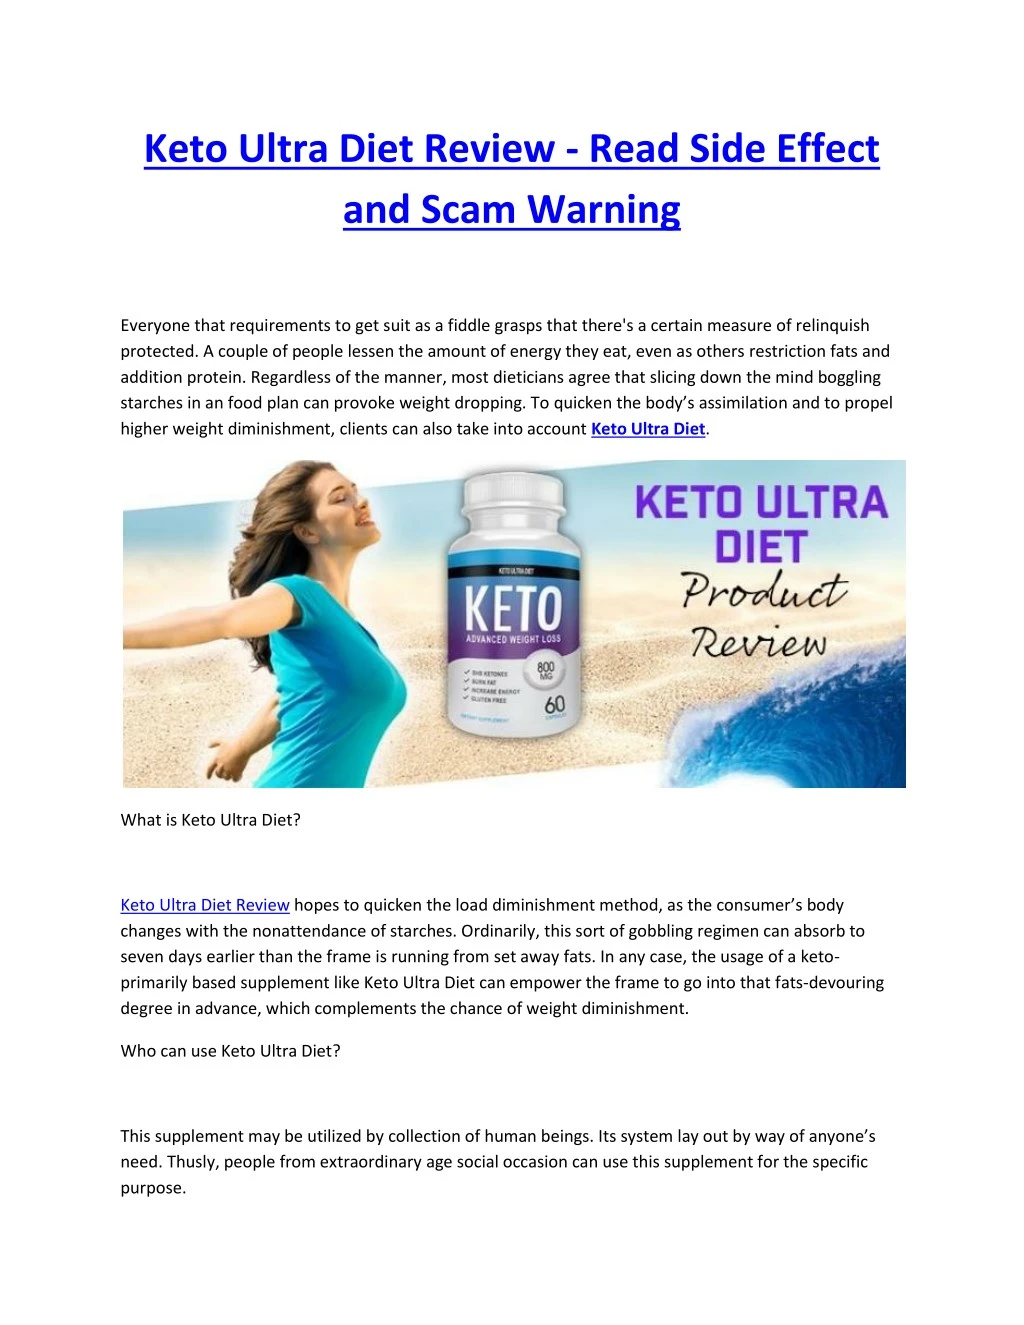 keto ultra diet review read side effect and scam